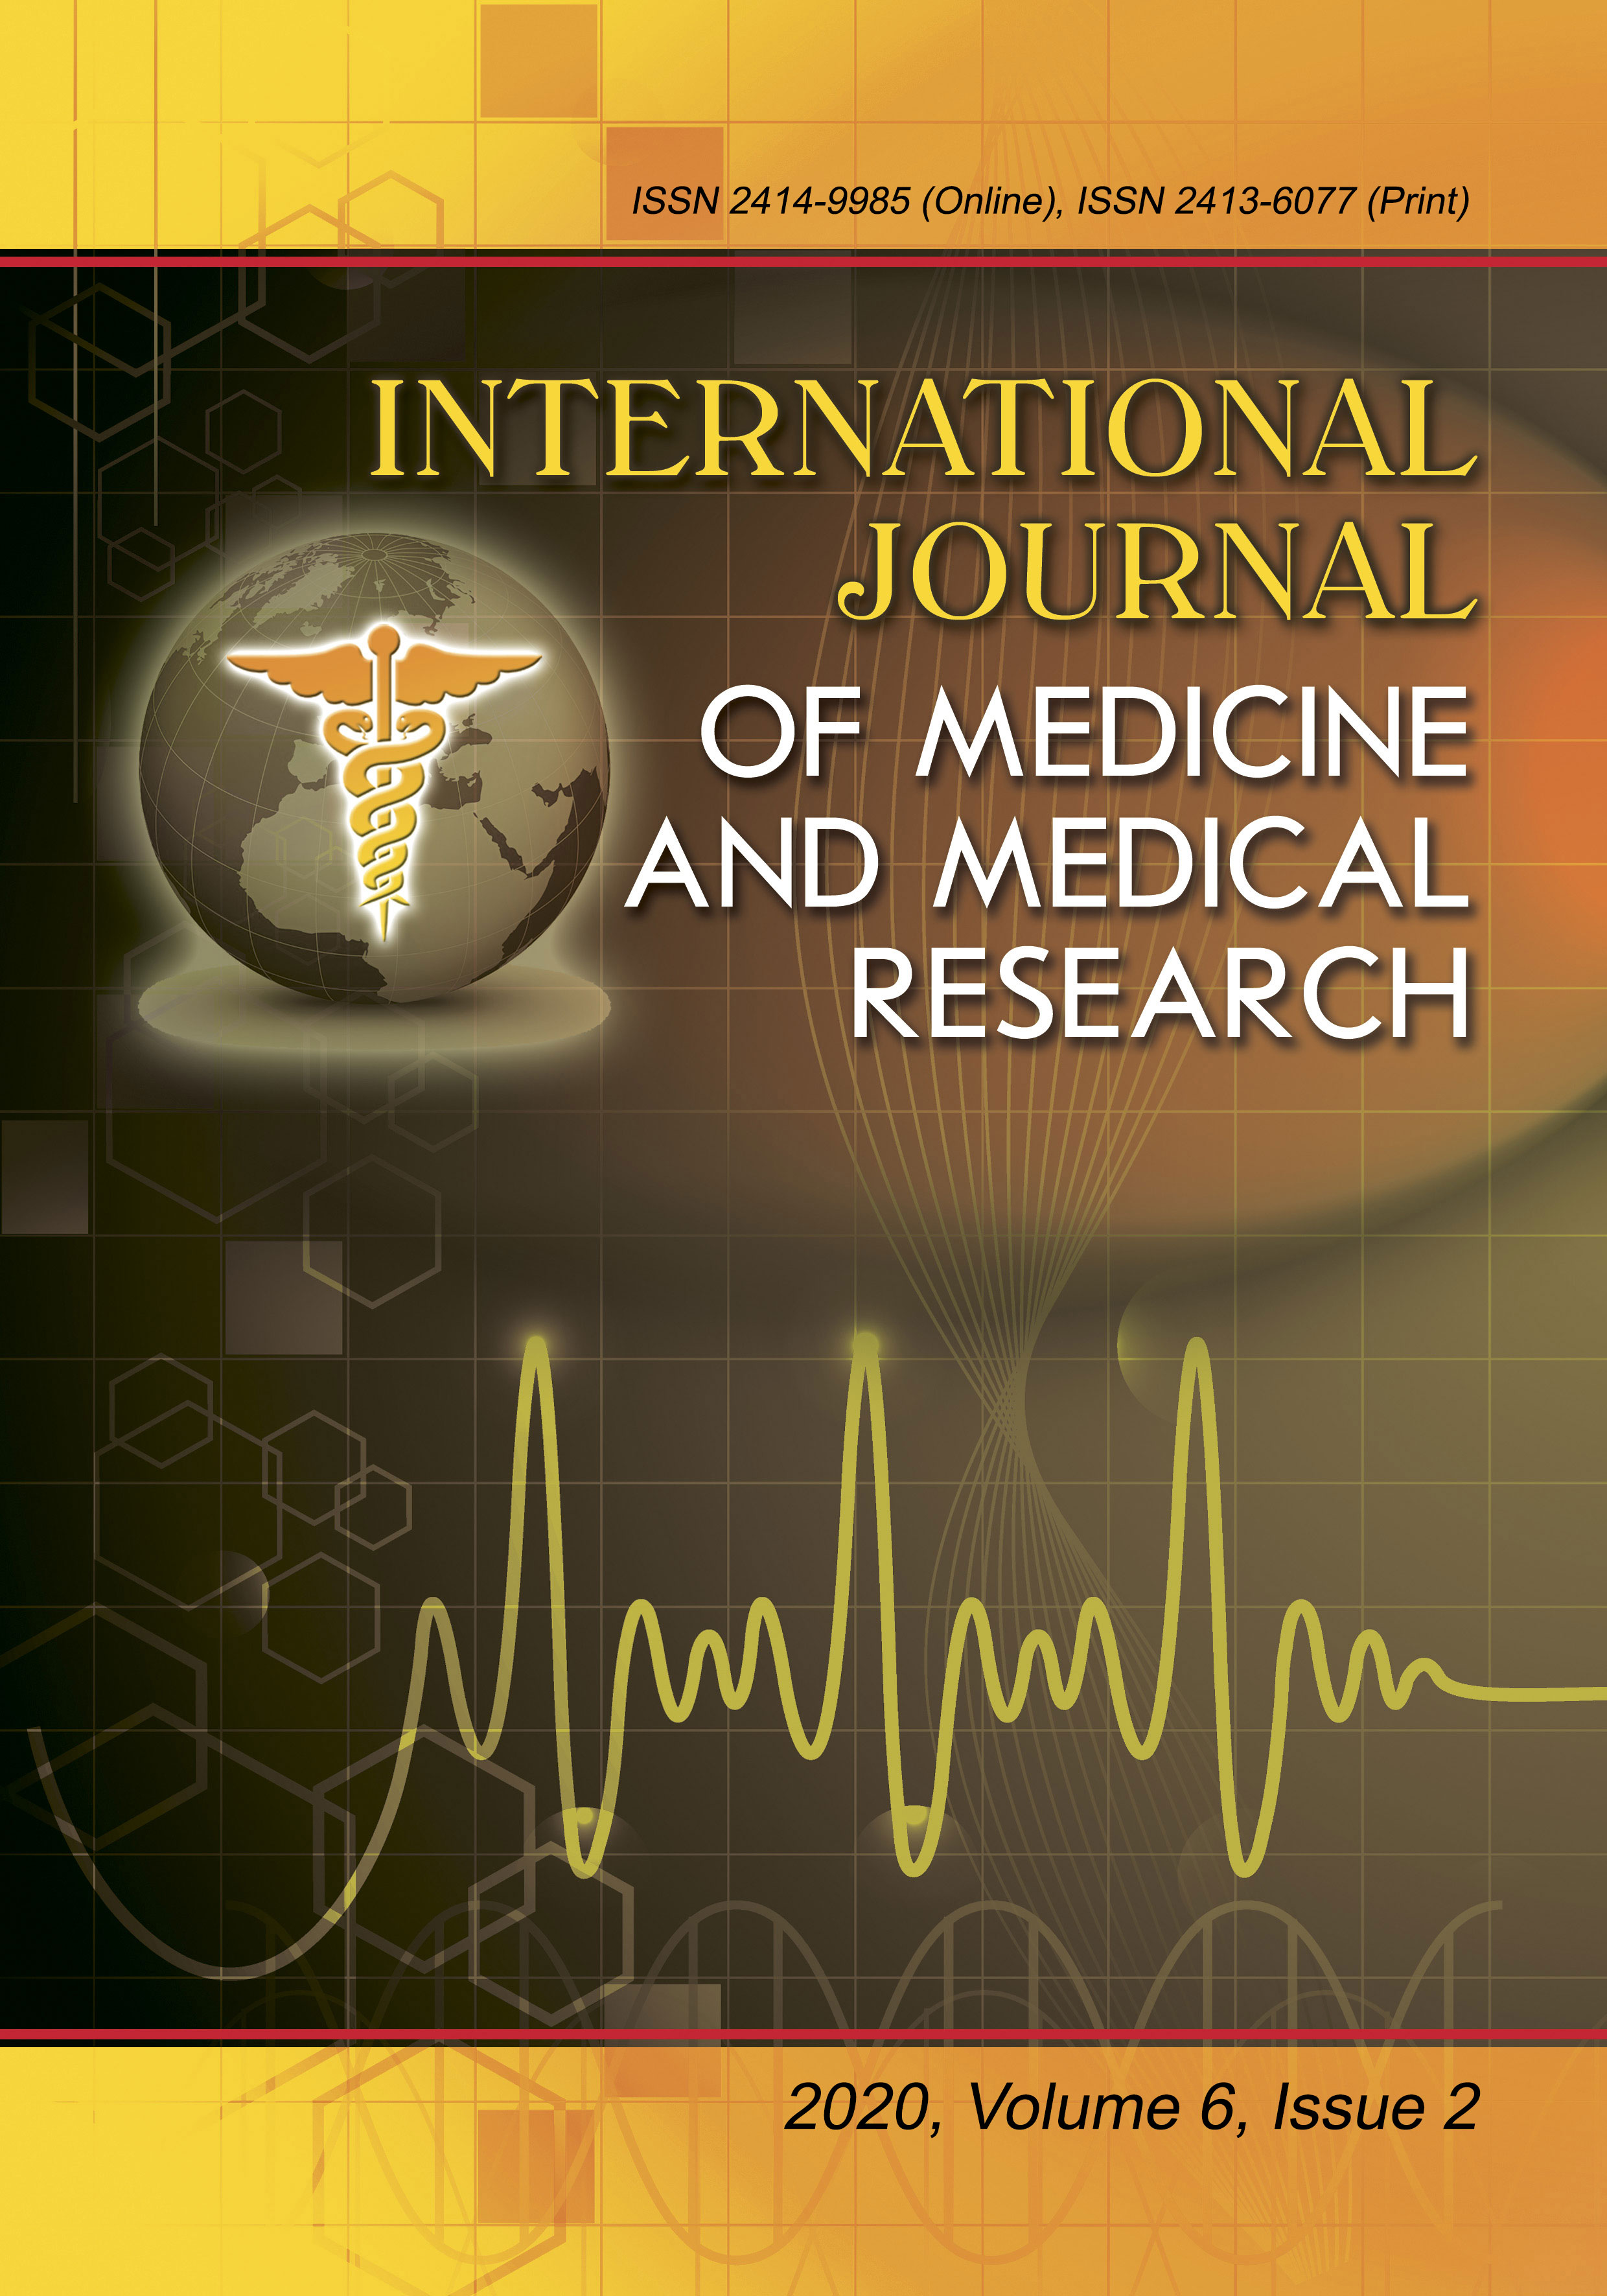 					View Vol. 6 No. 2 (2020): International Journal of Medicine and Medical Research
				